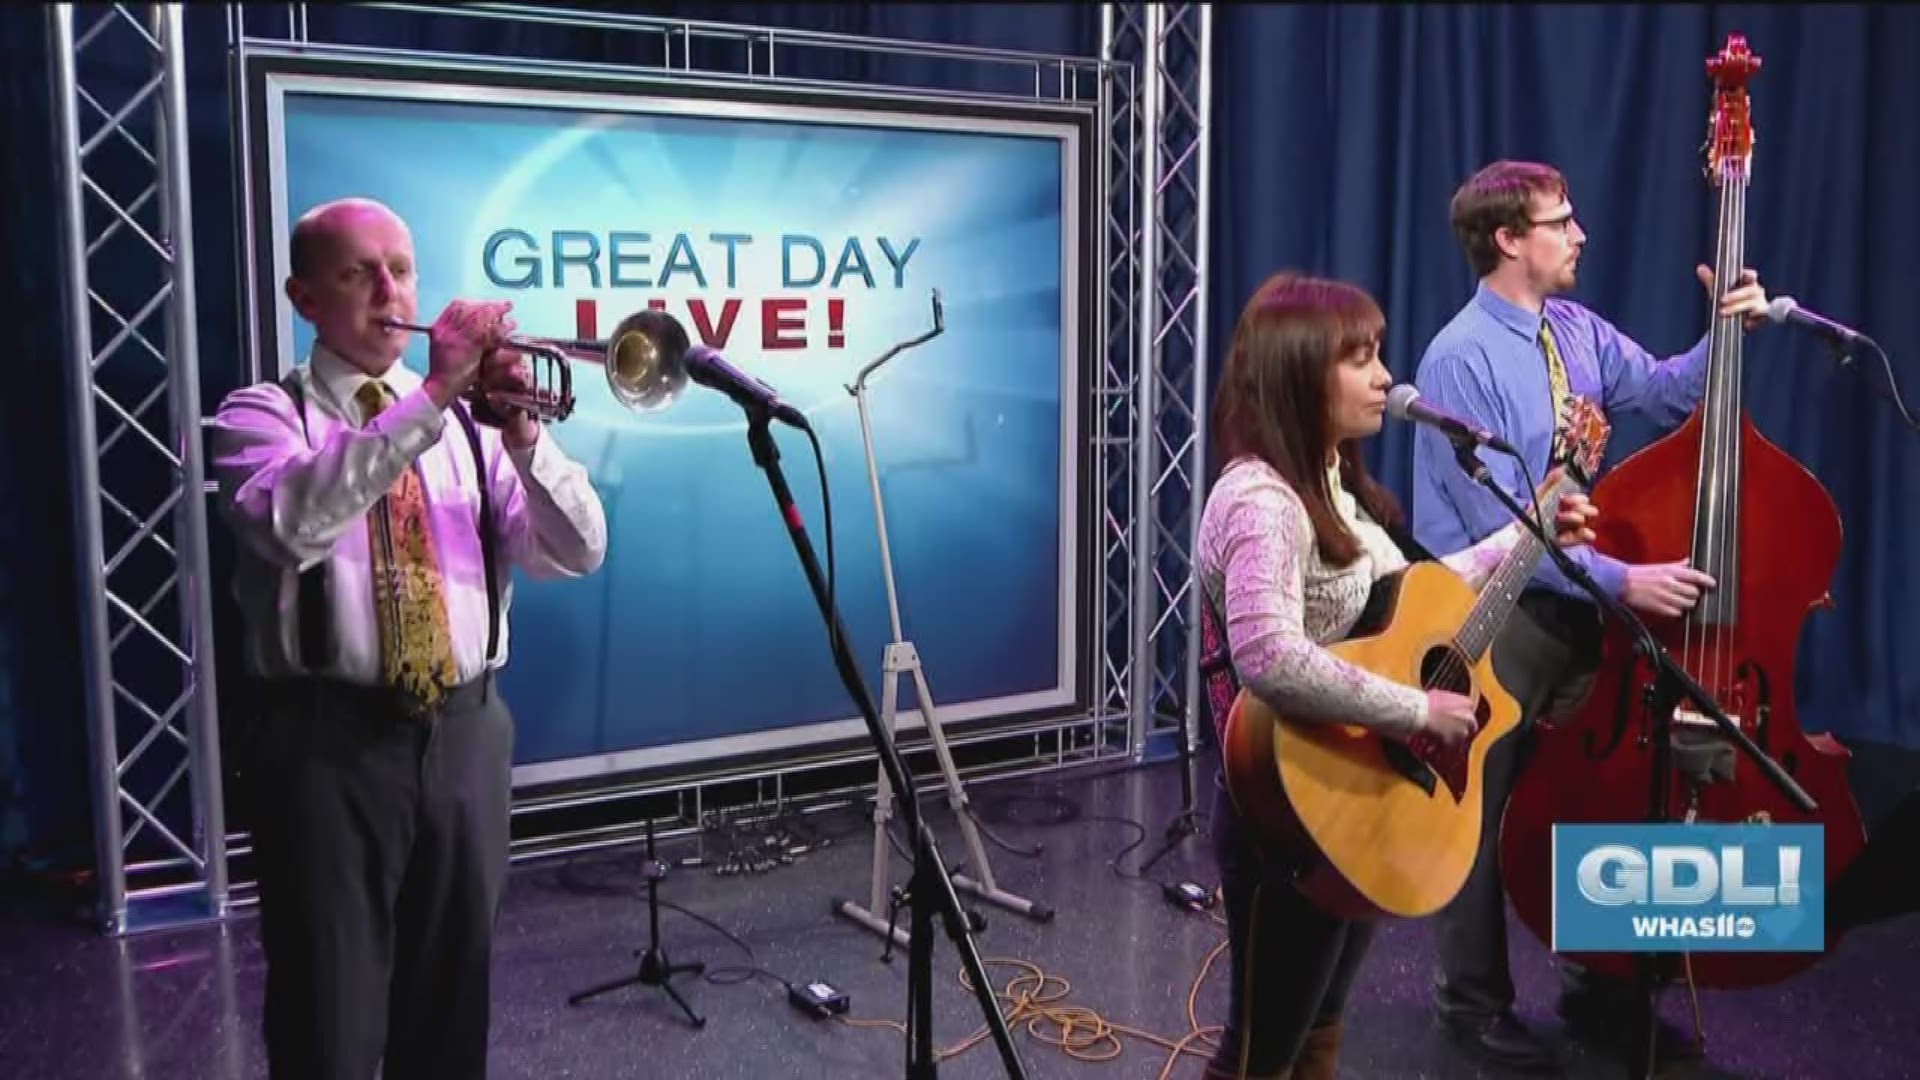 Quite Literally stopped by Great Day Live to perform a couple songs. You can follow them on Facebook and Instagram @QuiteLiterallyBand